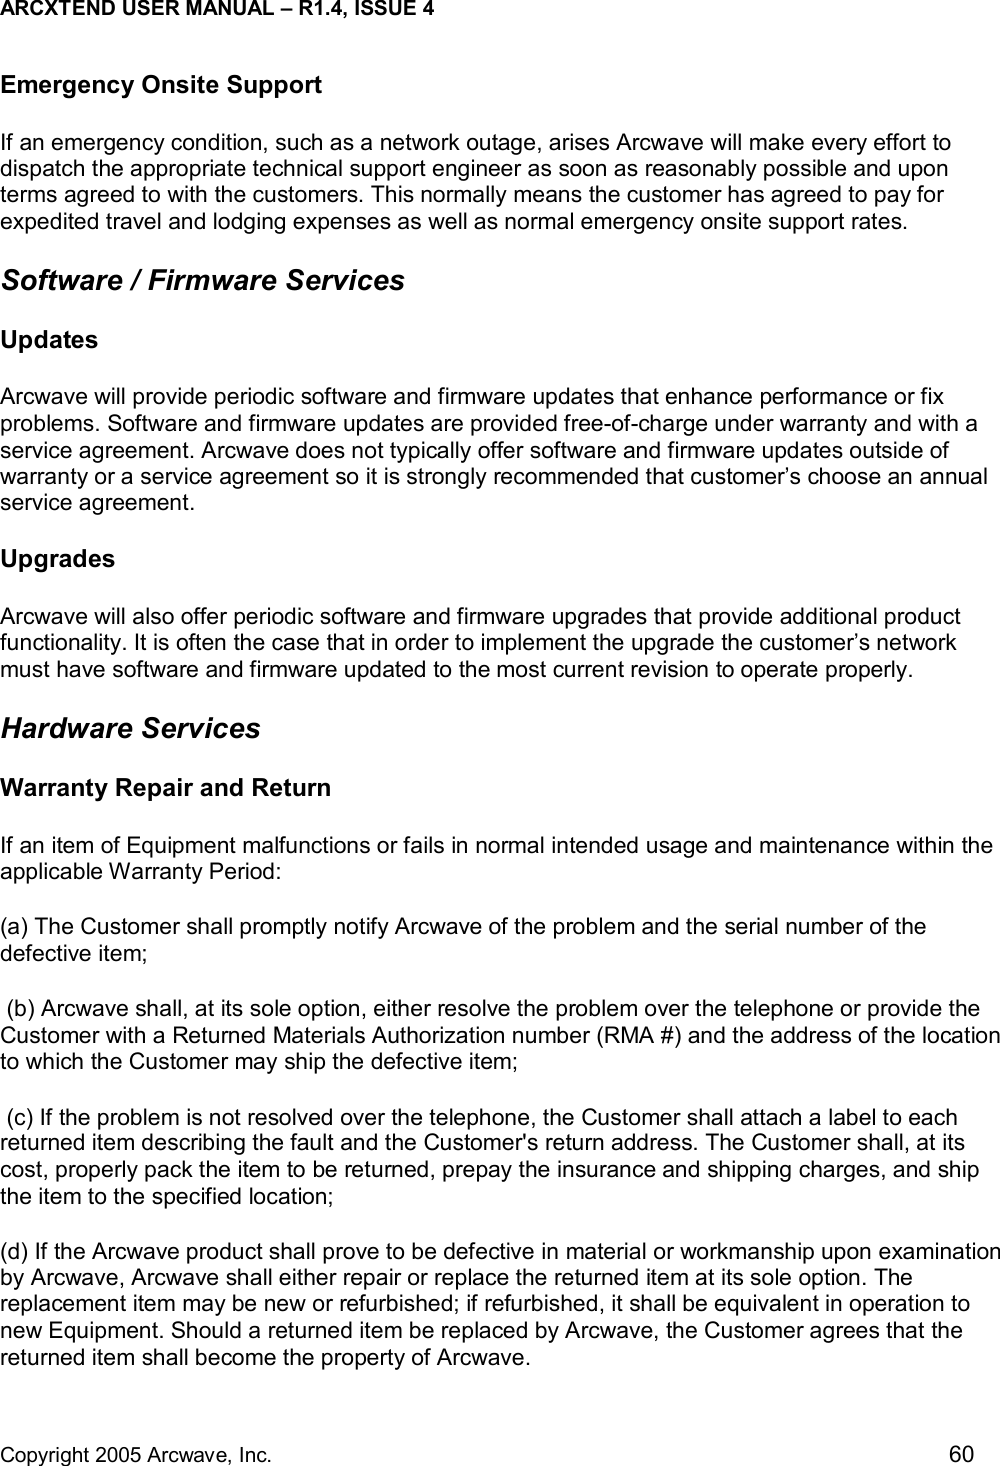 ARCXTEND USER MANUAL – R1.4, ISSUE 4  Copyright 2005 Arcwave, Inc.    60 Emergency Onsite Support If an emergency condition, such as a network outage, arises Arcwave will make every effort to dispatch the appropriate technical support engineer as soon as reasonably possible and upon terms agreed to with the customers. This normally means the customer has agreed to pay for expedited travel and lodging expenses as well as normal emergency onsite support rates. Software / Firmware Services Updates Arcwave will provide periodic software and firmware updates that enhance performance or fix problems. Software and firmware updates are provided free-of-charge under warranty and with a service agreement. Arcwave does not typically offer software and firmware updates outside of warranty or a service agreement so it is strongly recommended that customer’s choose an annual service agreement.  Upgrades Arcwave will also offer periodic software and firmware upgrades that provide additional product functionality. It is often the case that in order to implement the upgrade the customer’s network must have software and firmware updated to the most current revision to operate properly.  Hardware Services Warranty Repair and Return If an item of Equipment malfunctions or fails in normal intended usage and maintenance within the applicable Warranty Period:    (a) The Customer shall promptly notify Arcwave of the problem and the serial number of the defective item;    (b) Arcwave shall, at its sole option, either resolve the problem over the telephone or provide the Customer with a Returned Materials Authorization number (RMA #) and the address of the location to which the Customer may ship the defective item;   (c) If the problem is not resolved over the telephone, the Customer shall attach a label to each returned item describing the fault and the Customer&apos;s return address. The Customer shall, at its cost, properly pack the item to be returned, prepay the insurance and shipping charges, and ship the item to the specified location;    (d) If the Arcwave product shall prove to be defective in material or workmanship upon examination by Arcwave, Arcwave shall either repair or replace the returned item at its sole option. The replacement item may be new or refurbished; if refurbished, it shall be equivalent in operation to new Equipment. Should a returned item be replaced by Arcwave, the Customer agrees that the returned item shall become the property of Arcwave.    